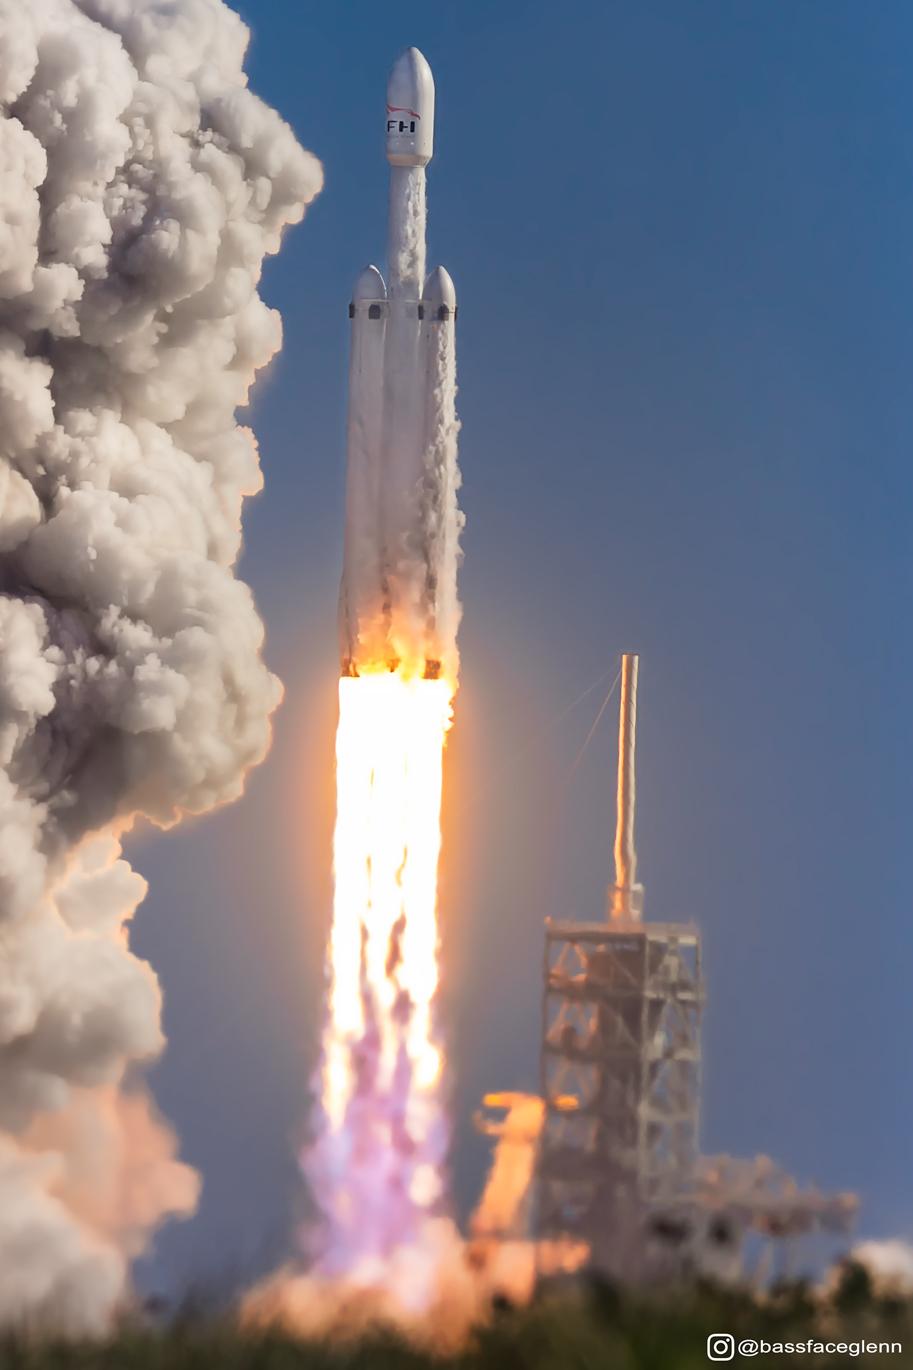 Falcon Heavy Liftoff! Shot 4 miles away with camera connected to a